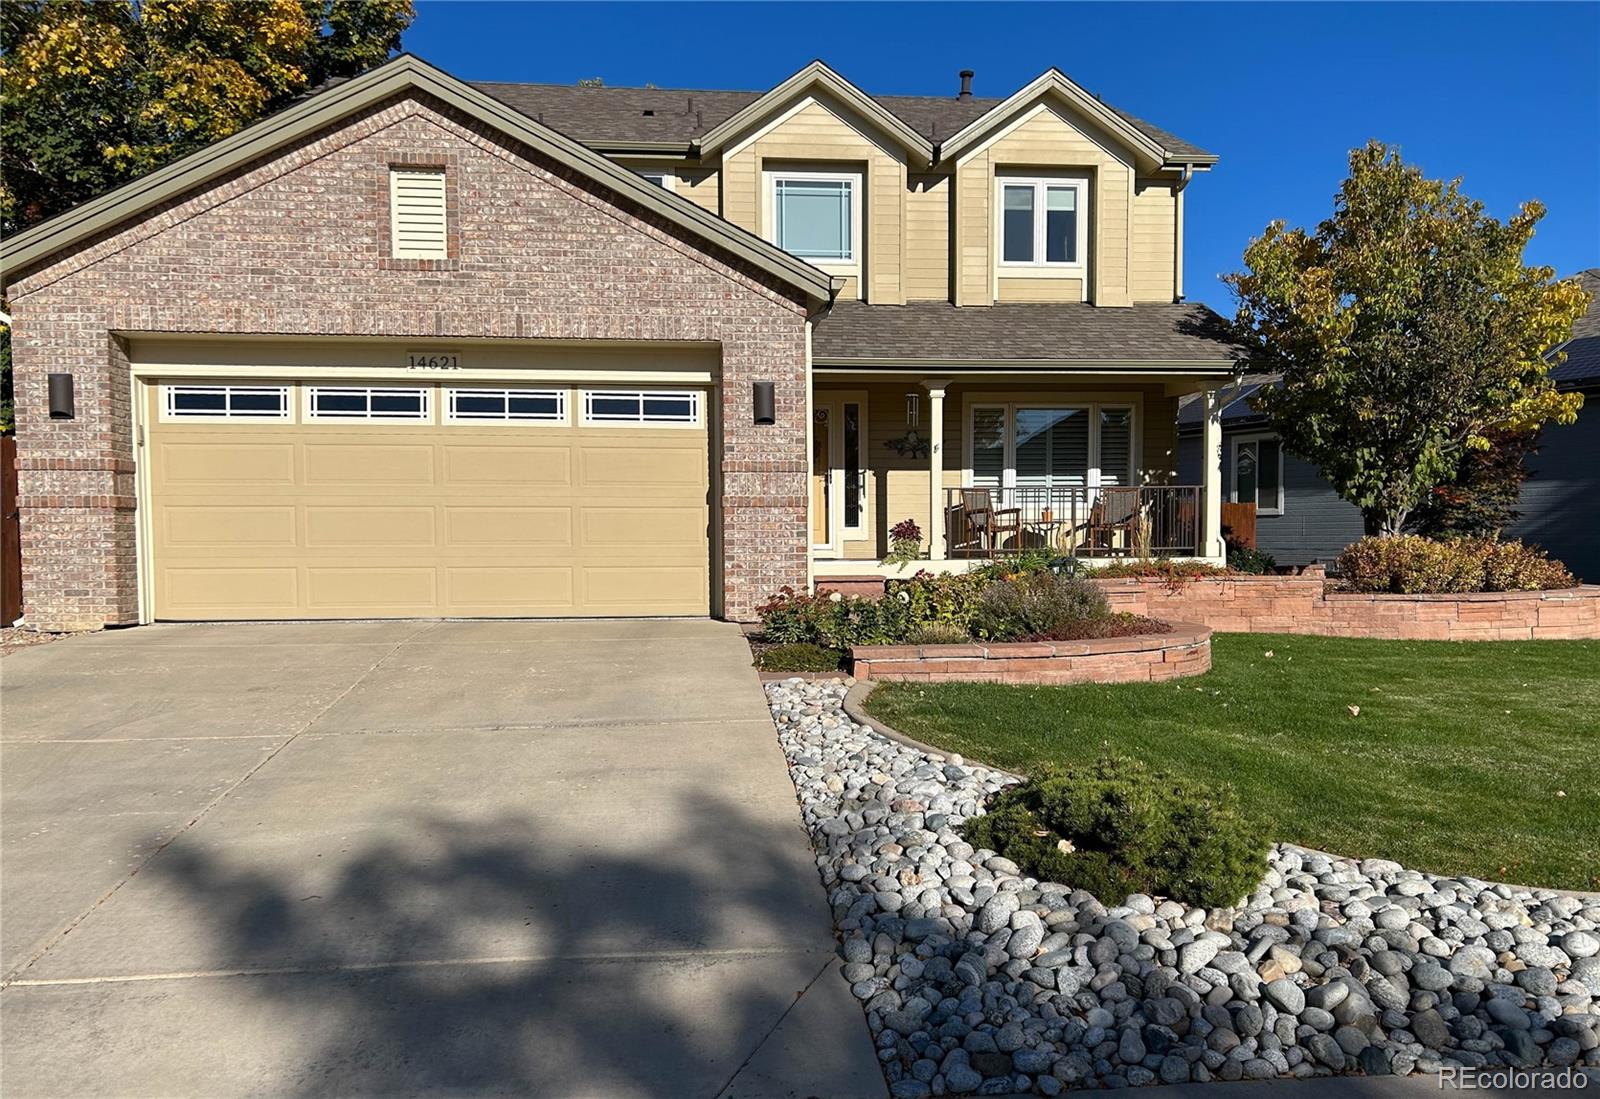 14621 w 62nd avenue, Arvada sold home. Closed on 2024-03-08 for $875,000.